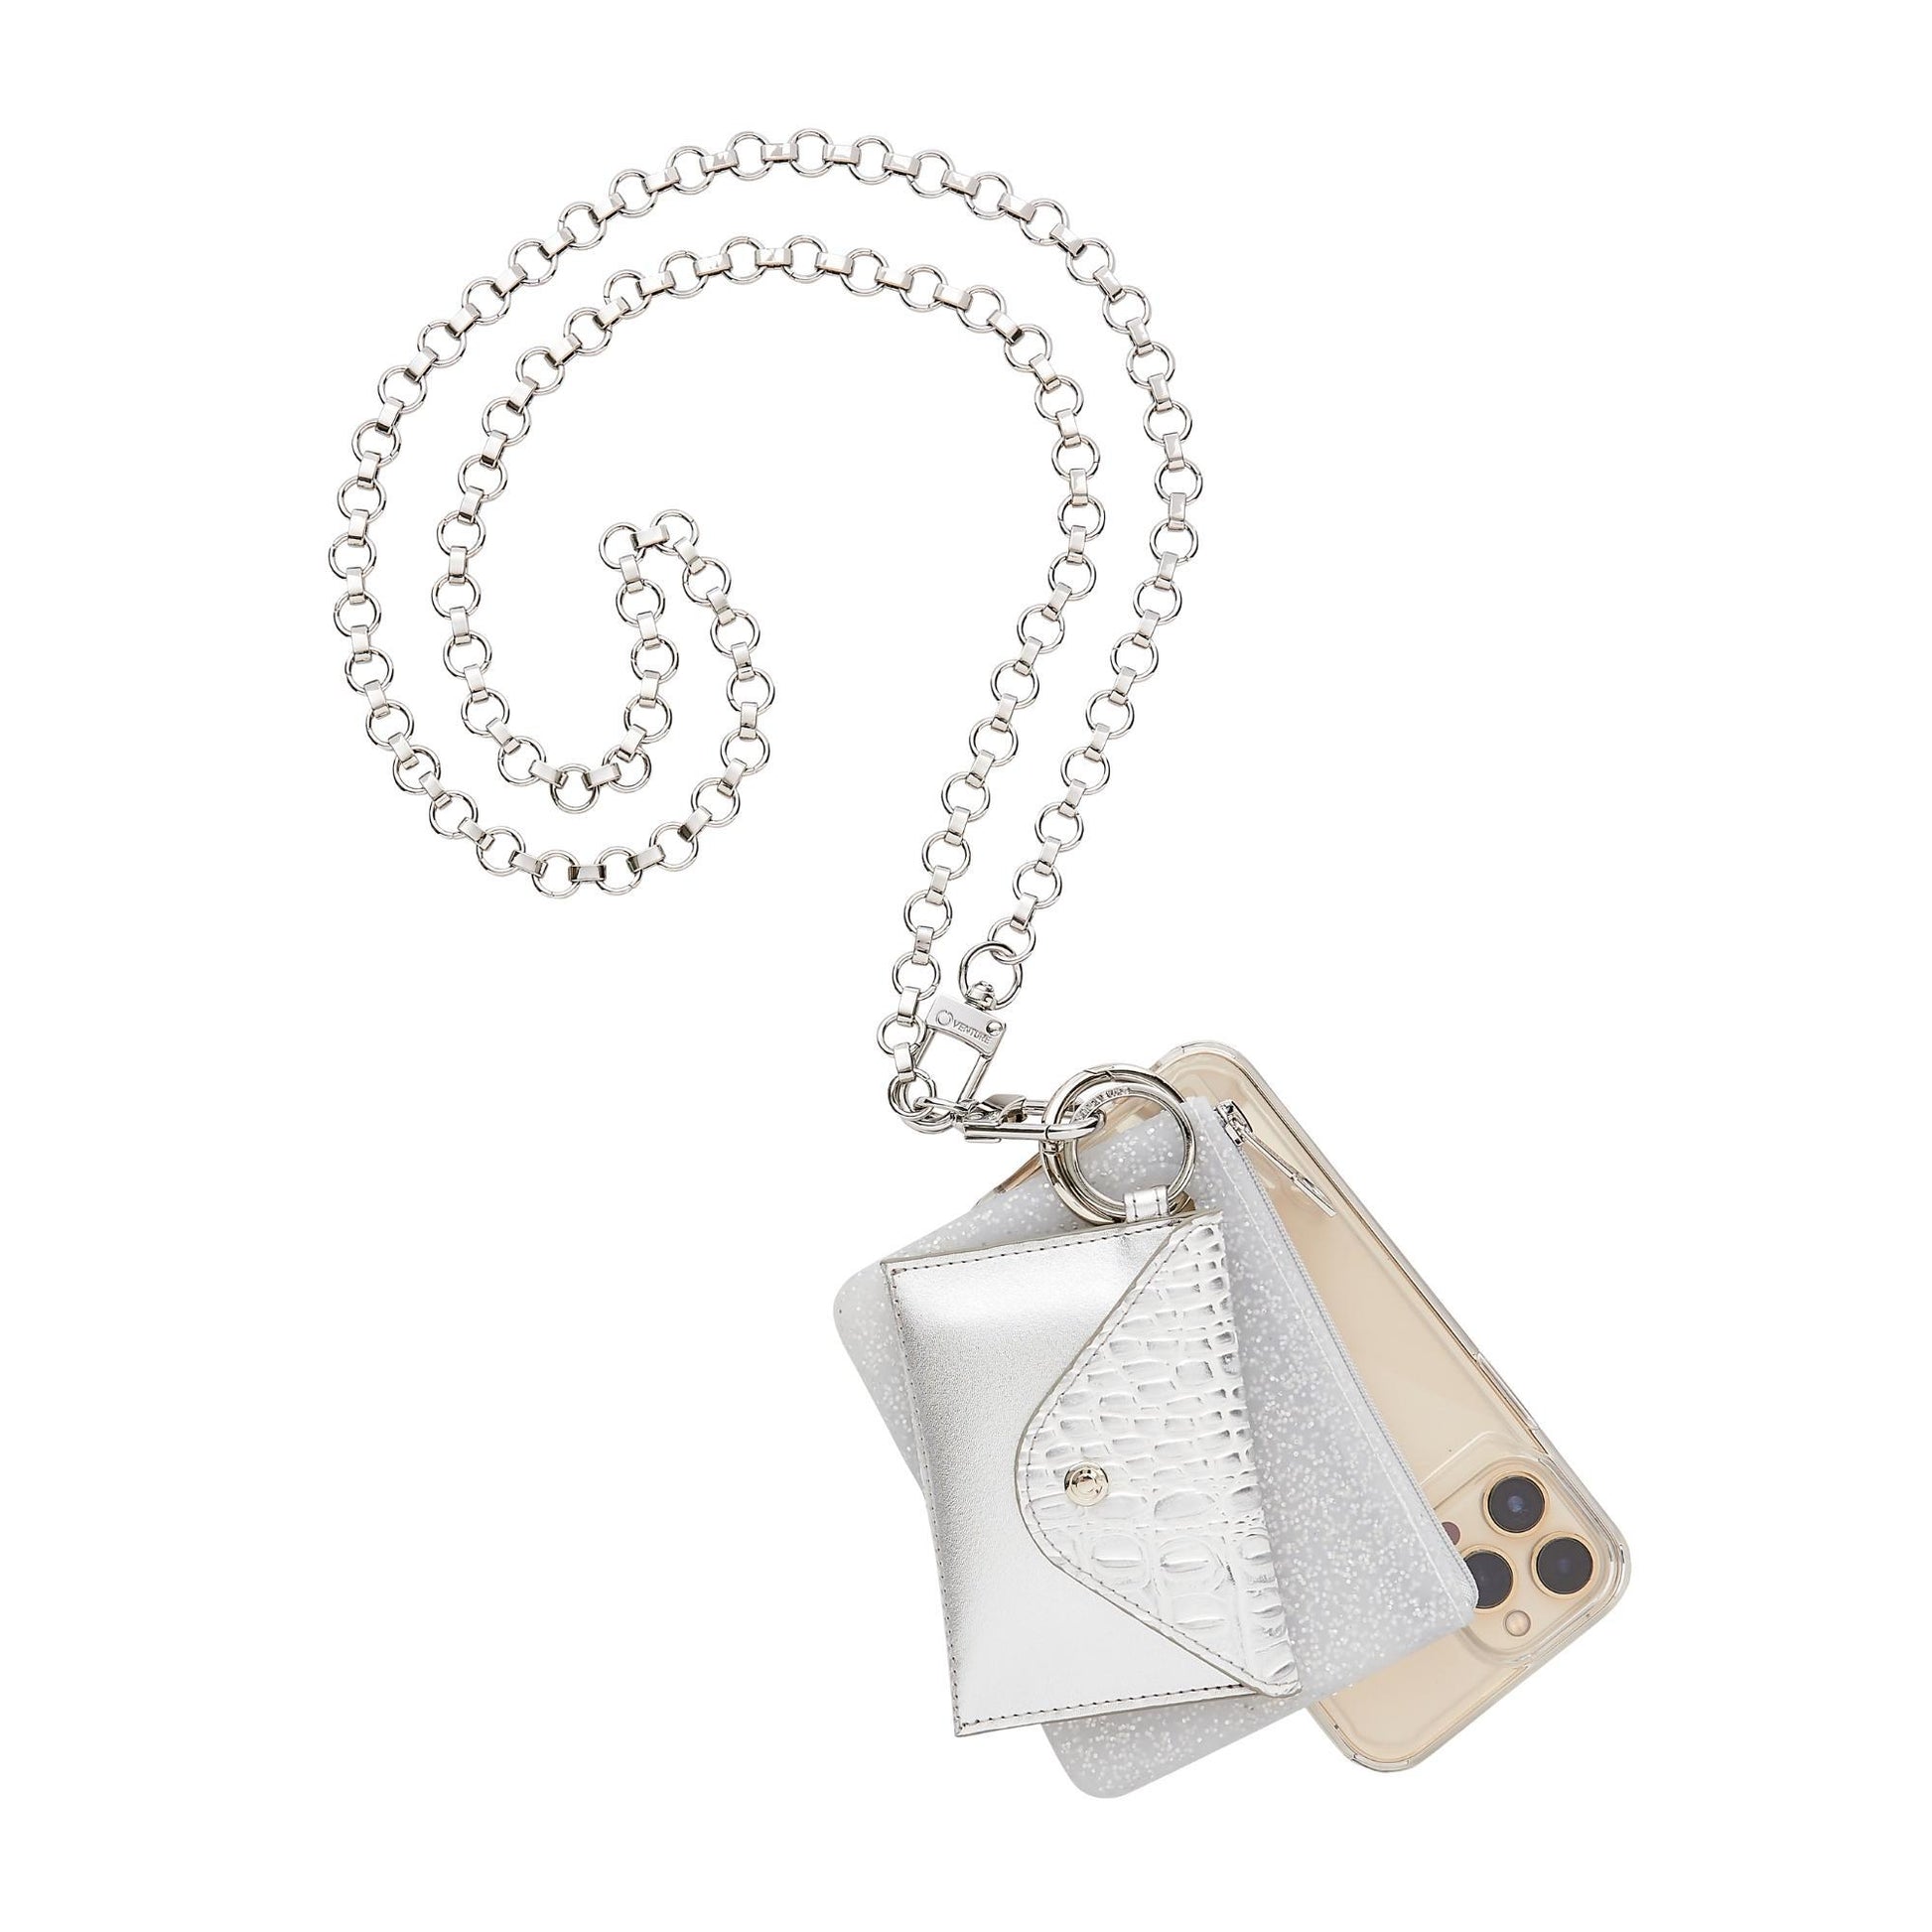 Quicksilver crossbody chain with phone attached with quicksilver silicone mini pouch and leather mini envelope